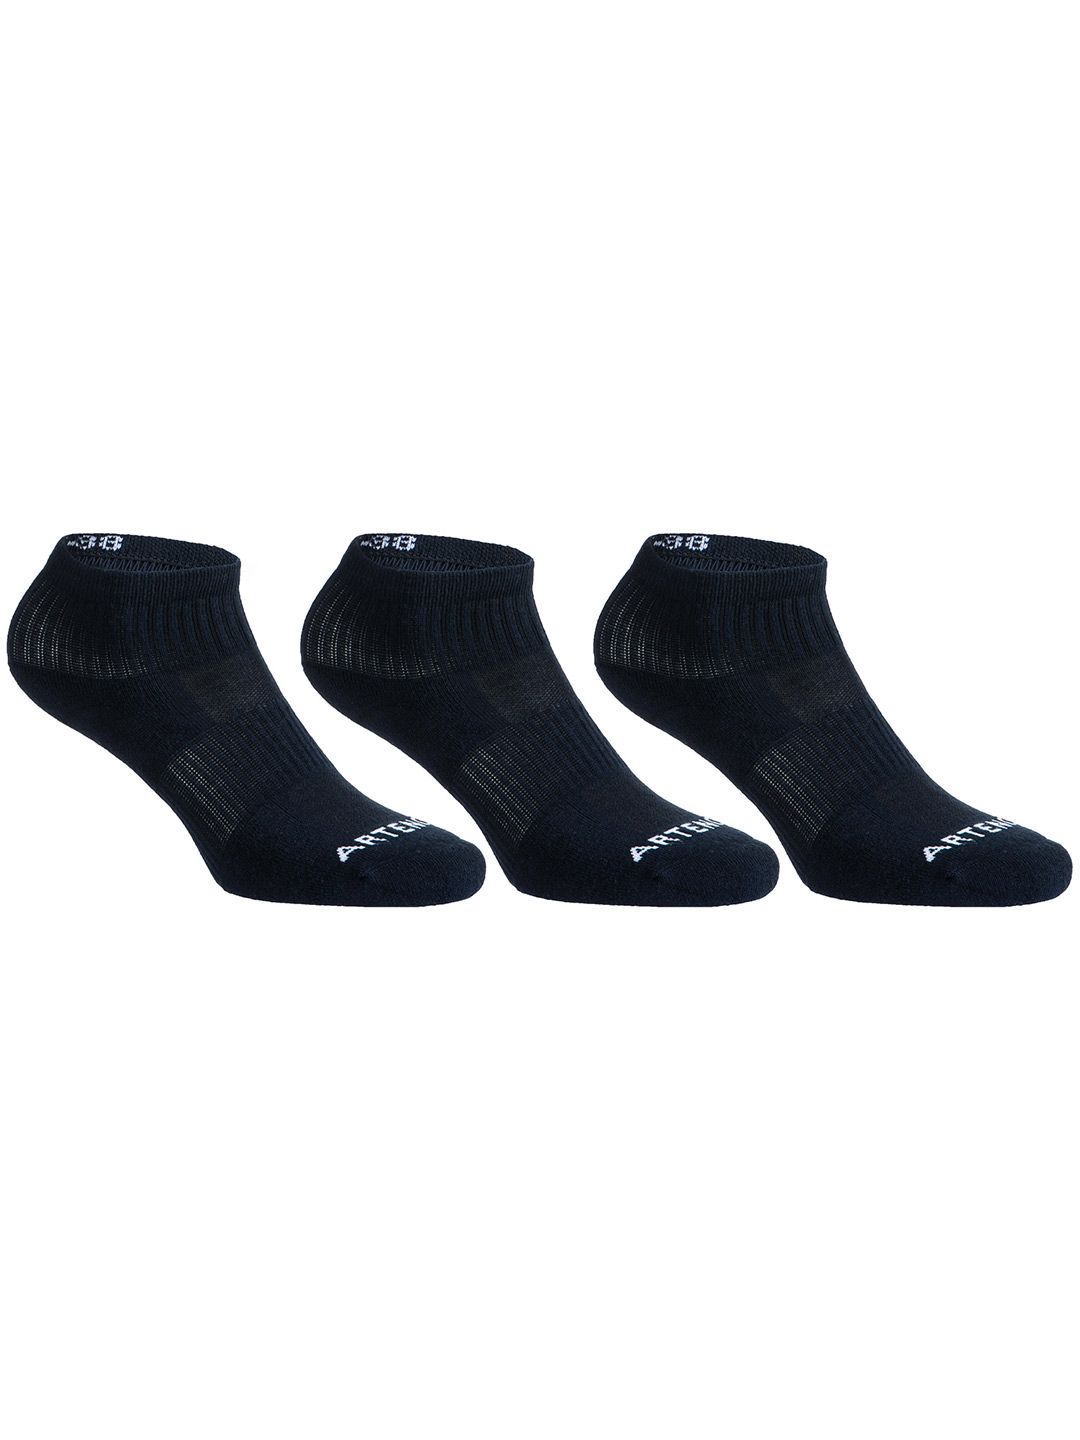 Artengo By Decathlon Adults Black & White Pack of 3 Ankle Length Socks Price in India